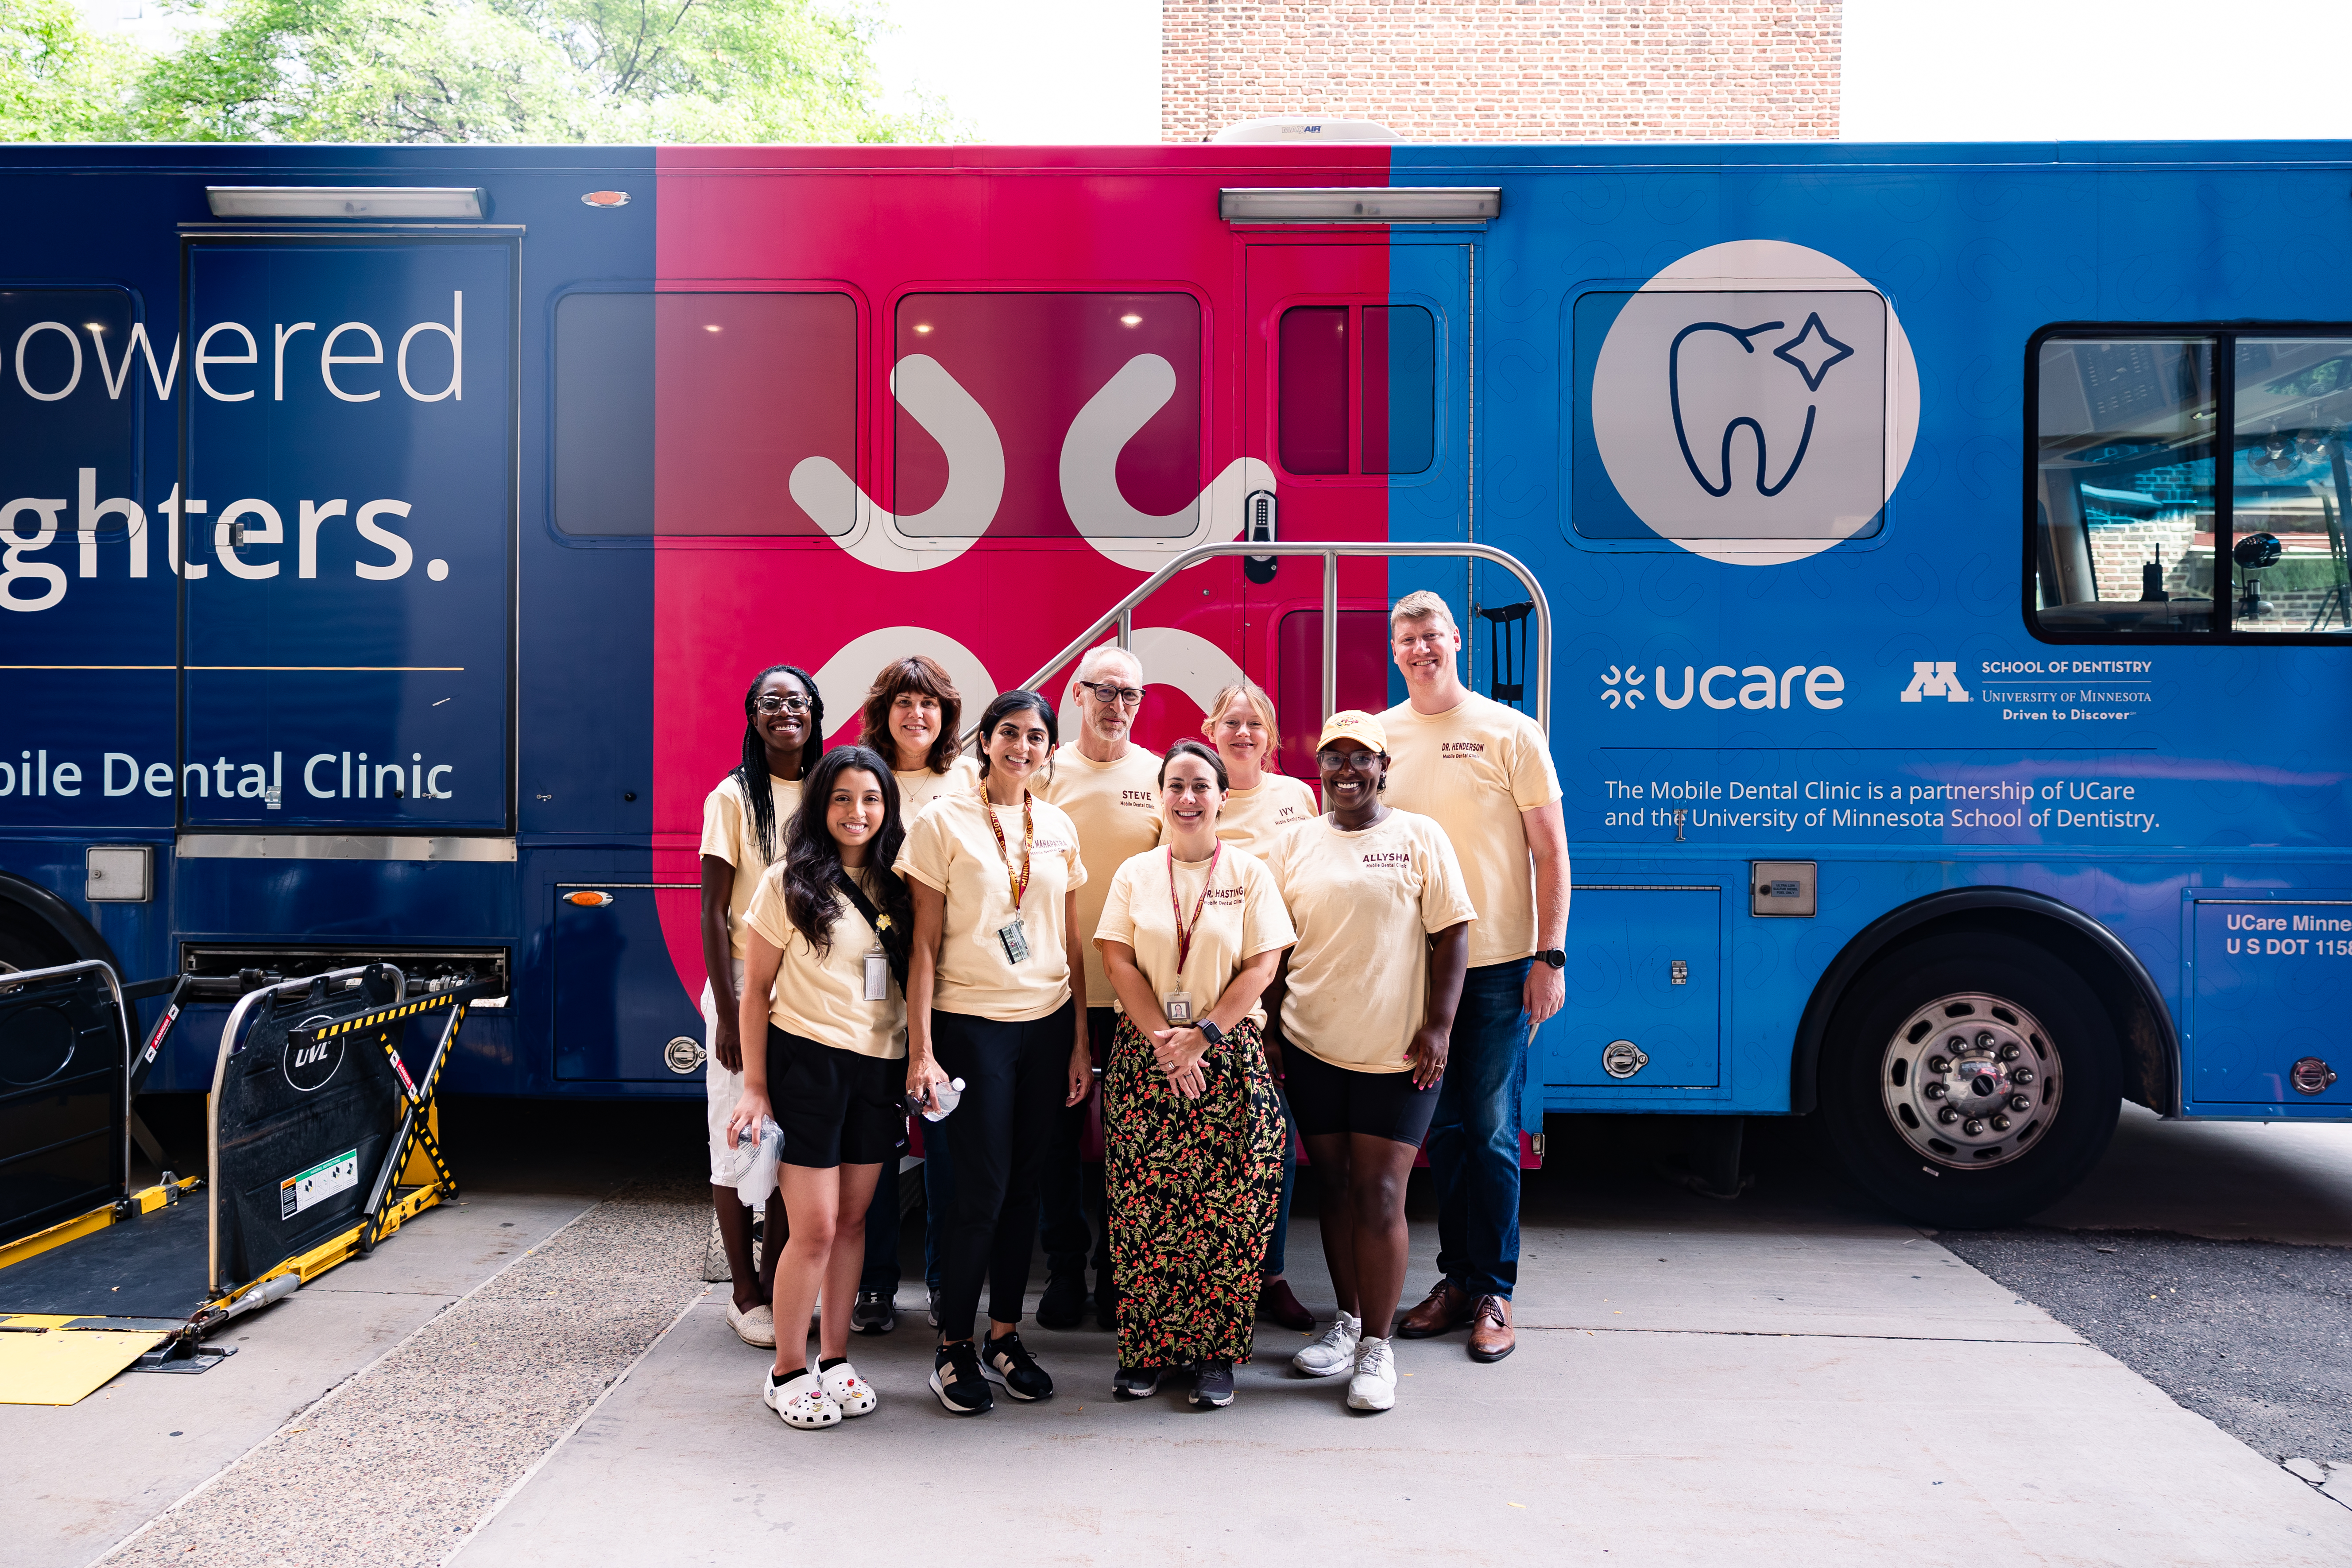 Group shot of Mobile Dental Clinic staff